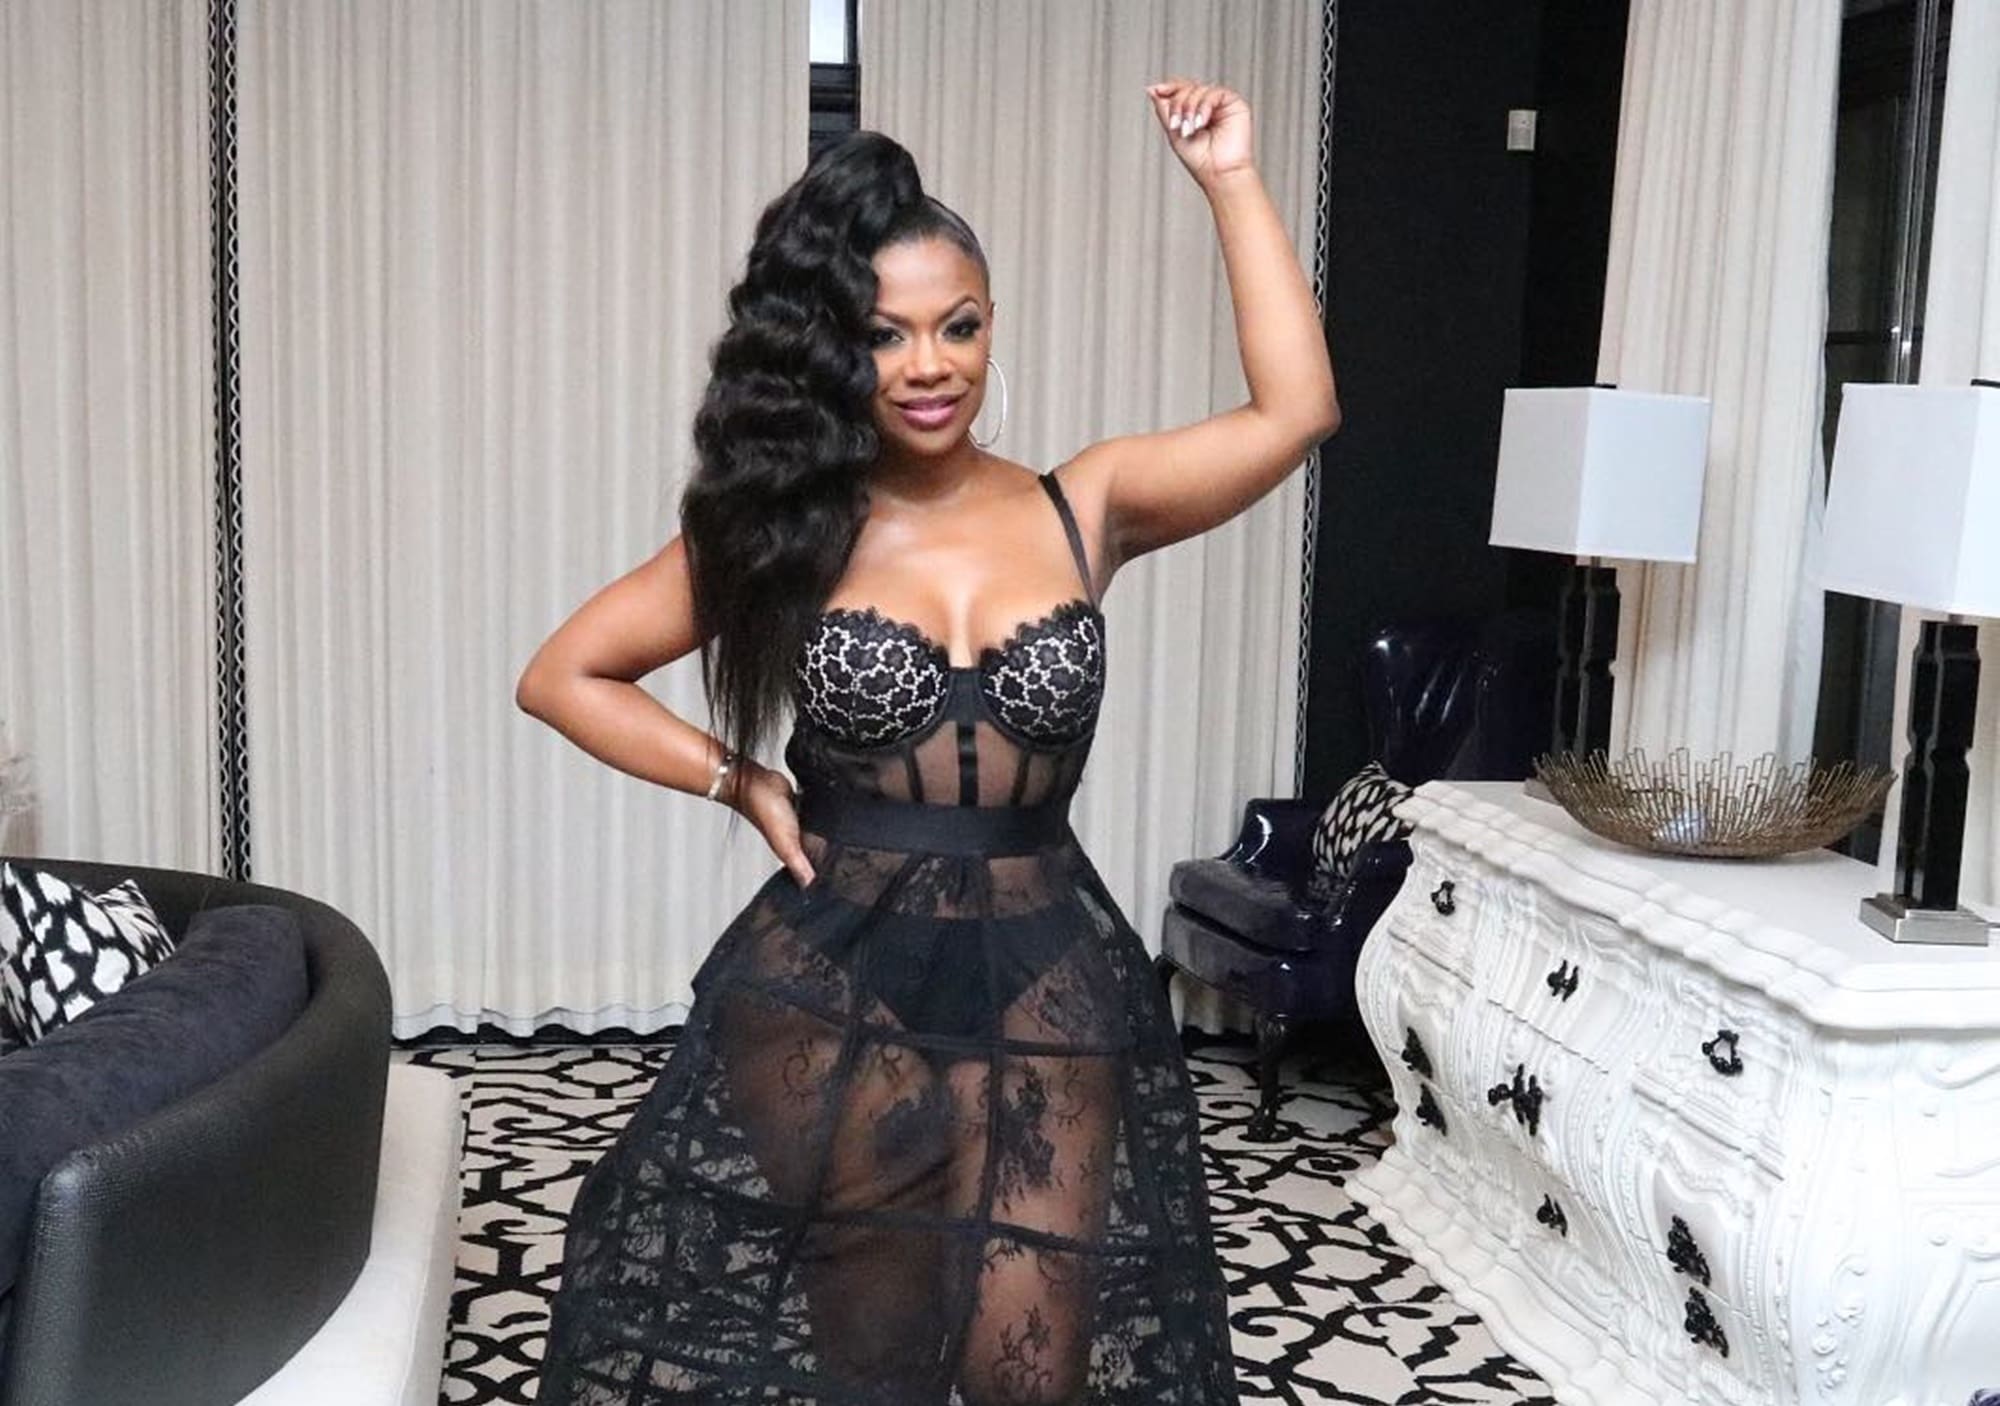 ”kandi-burruss-makes-fans-happy-with-a-new-behind-the-scenes-video-from-the-dungeon-show-watch-her-and-the-crew-here”